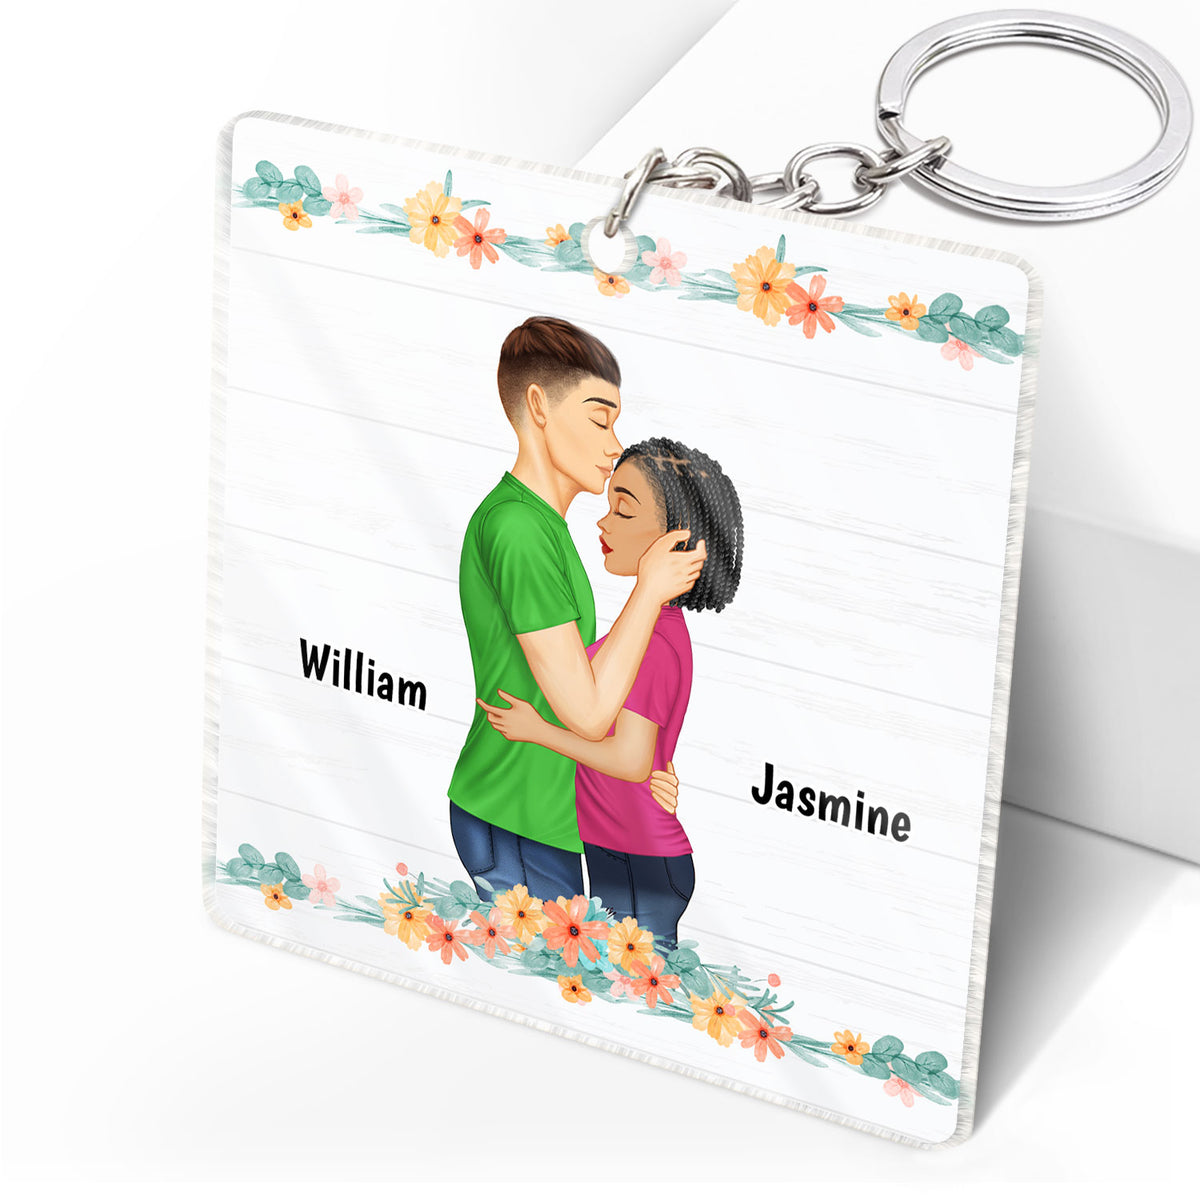 Clear Acrylic Round Keychain With Tassel Mockup Add Your Own Image and  Background 